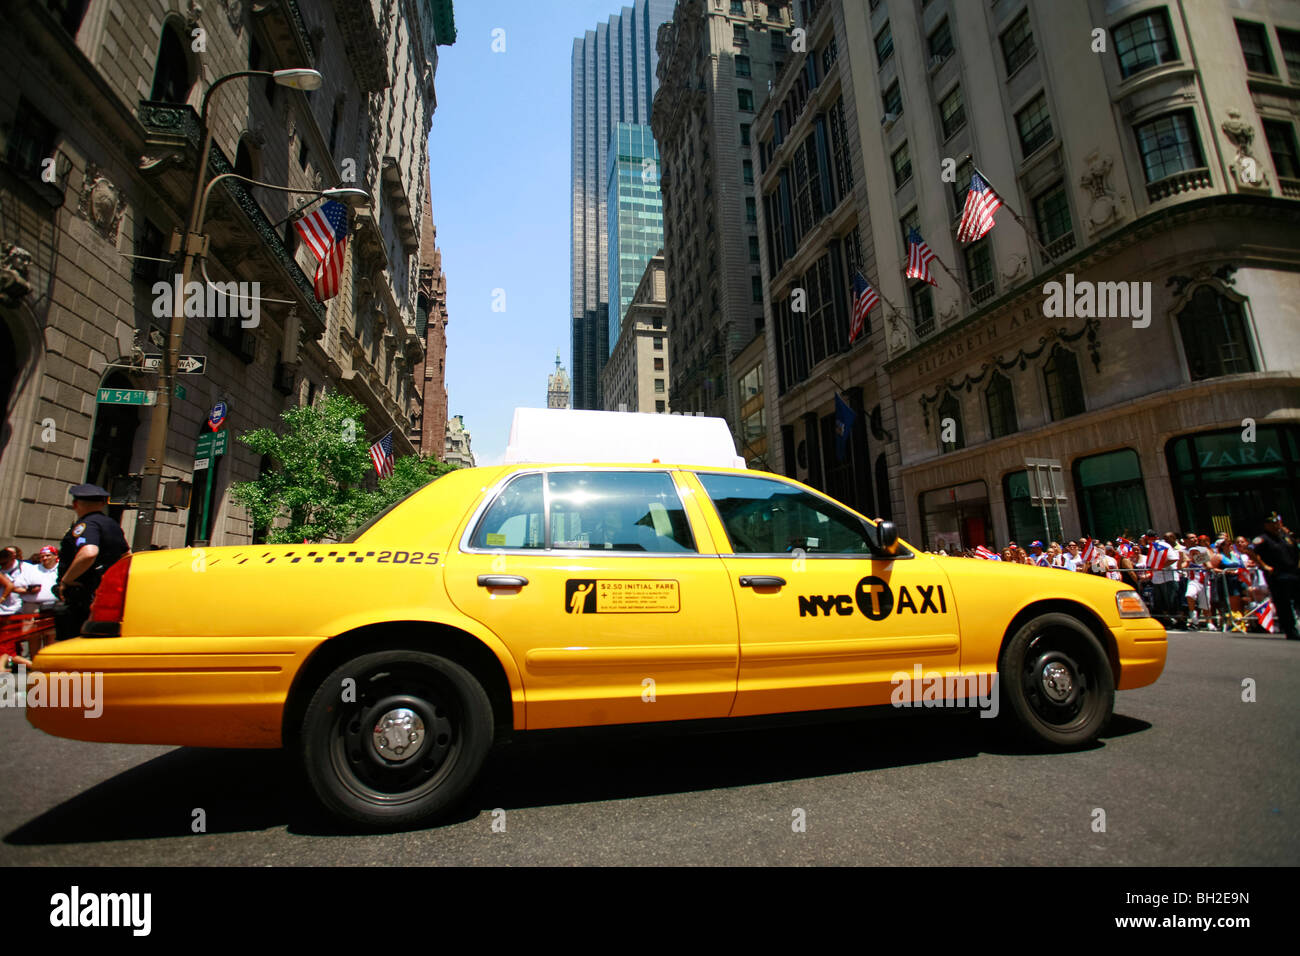 New York City taxicab during Midtown rush hour in Manhattan. Stock Photo